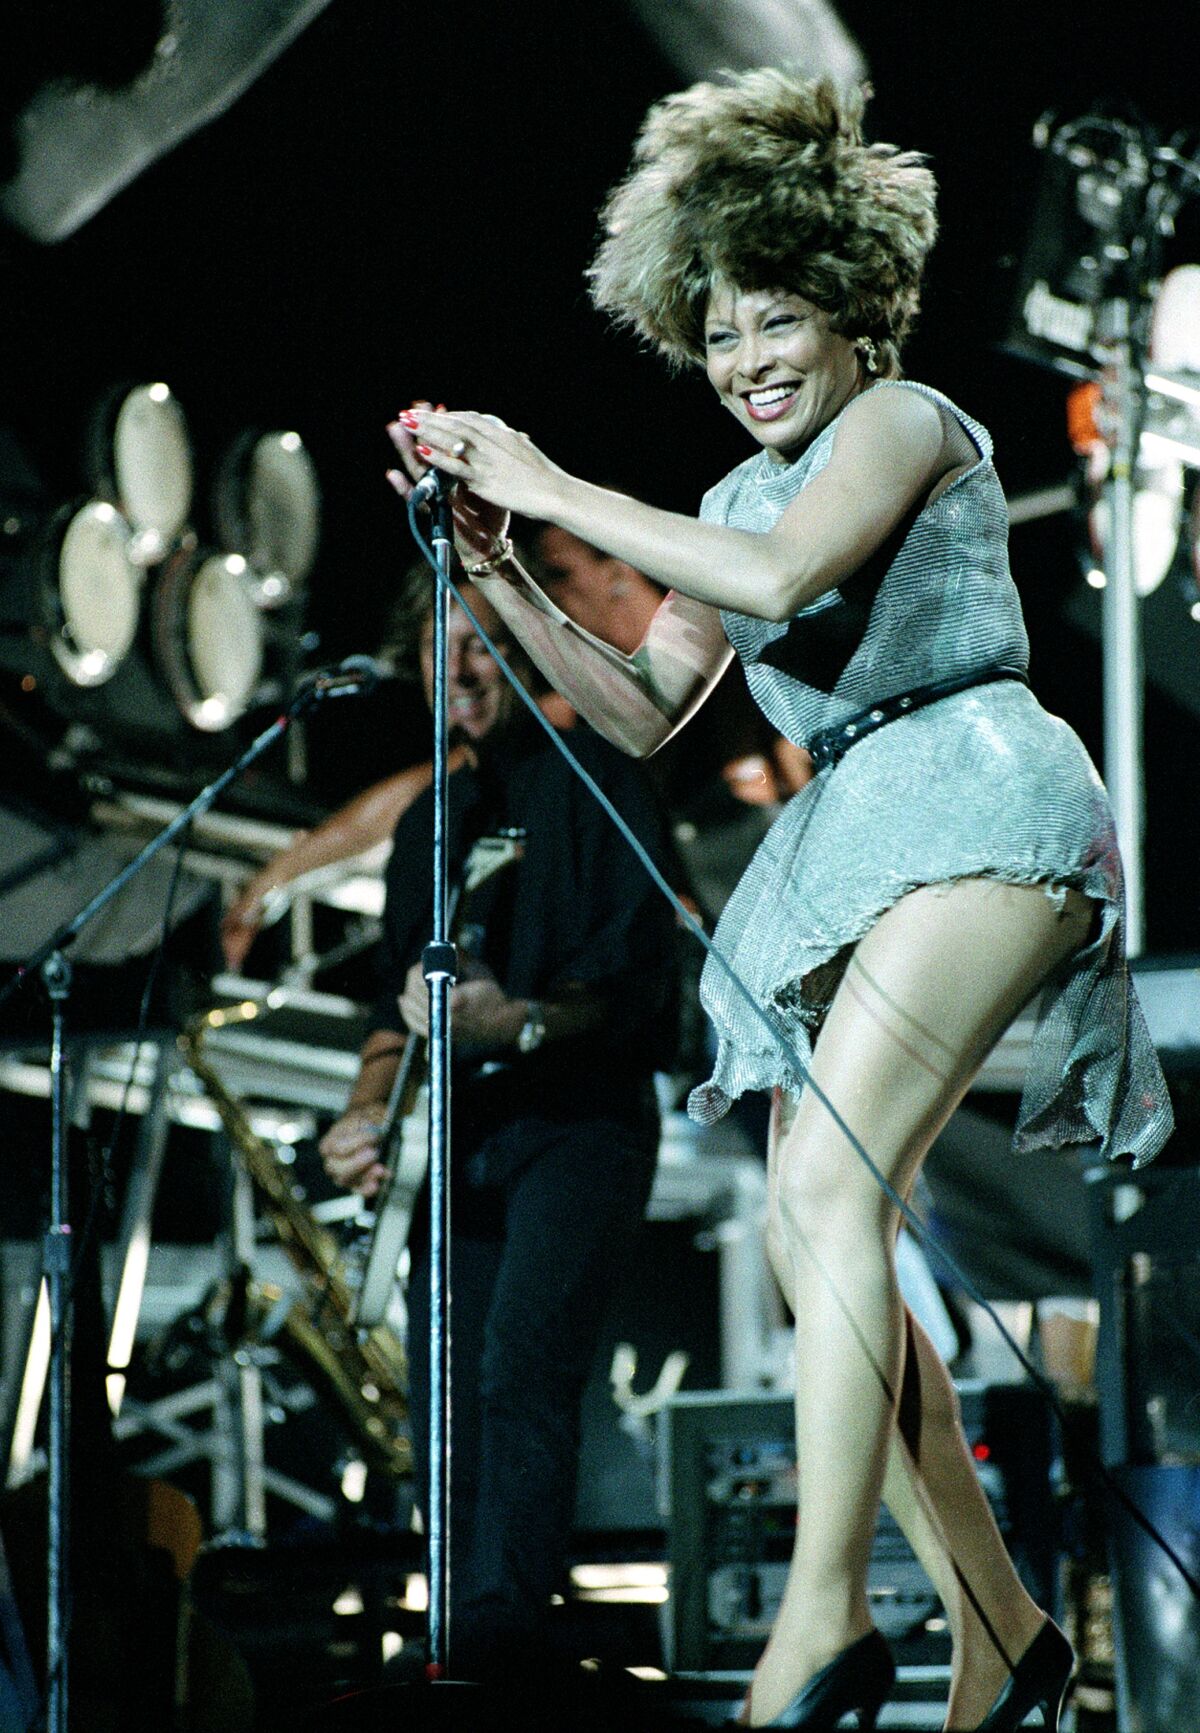 Tina Turner performing on stage in a short dress, smiling and holding a microphone stand with both hands. 